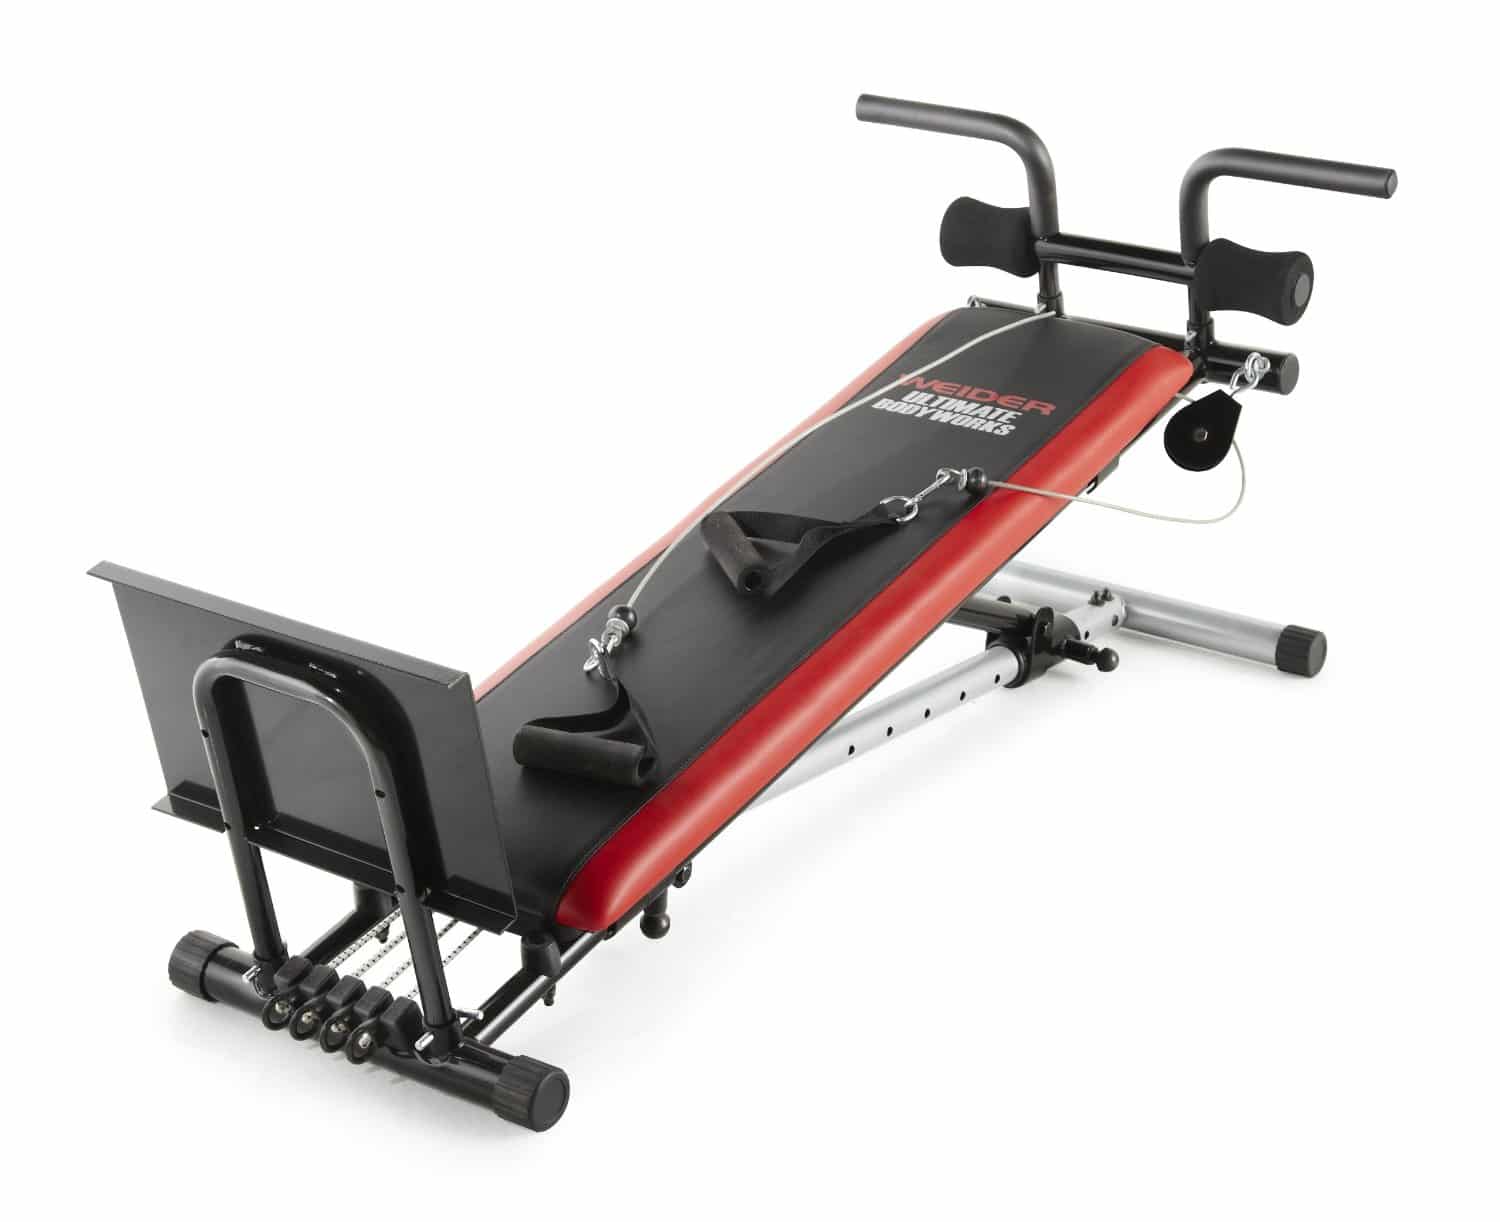 Weider Ultimate Body Works With Cables Handles Attached